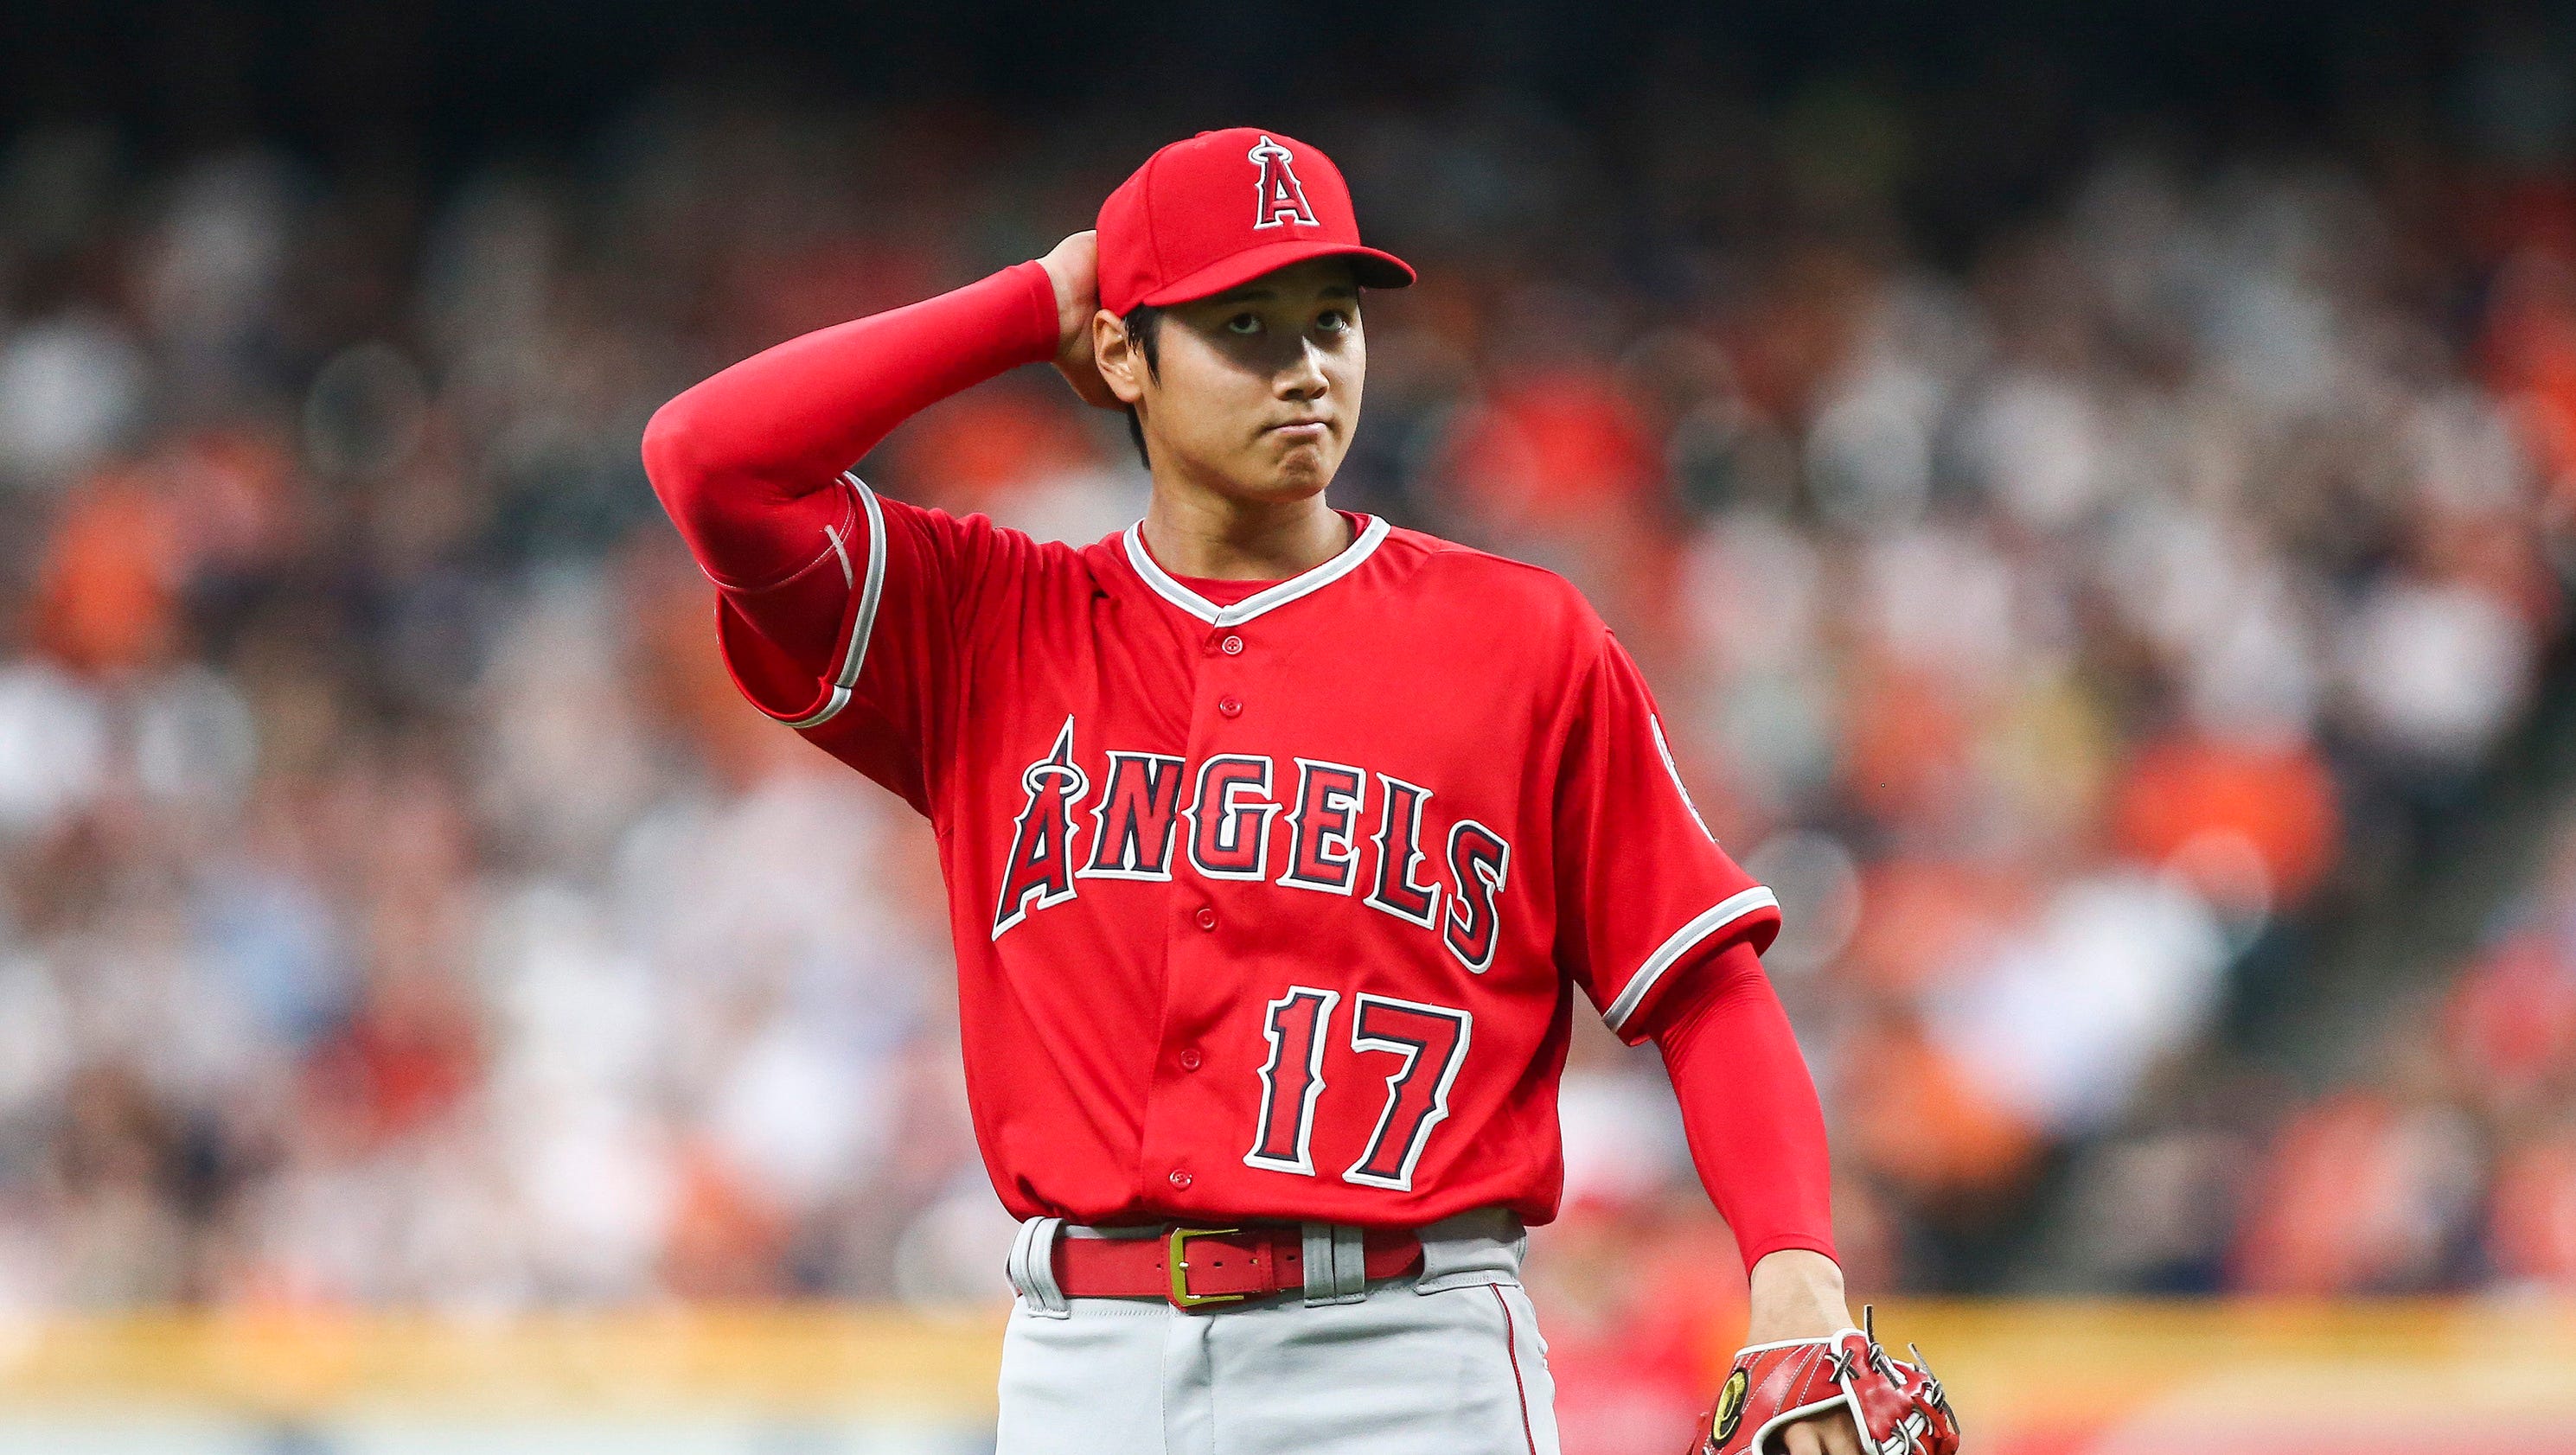 shohei ohtani introduced himself to angels fans in the on shohei ohtani angels wallpapers